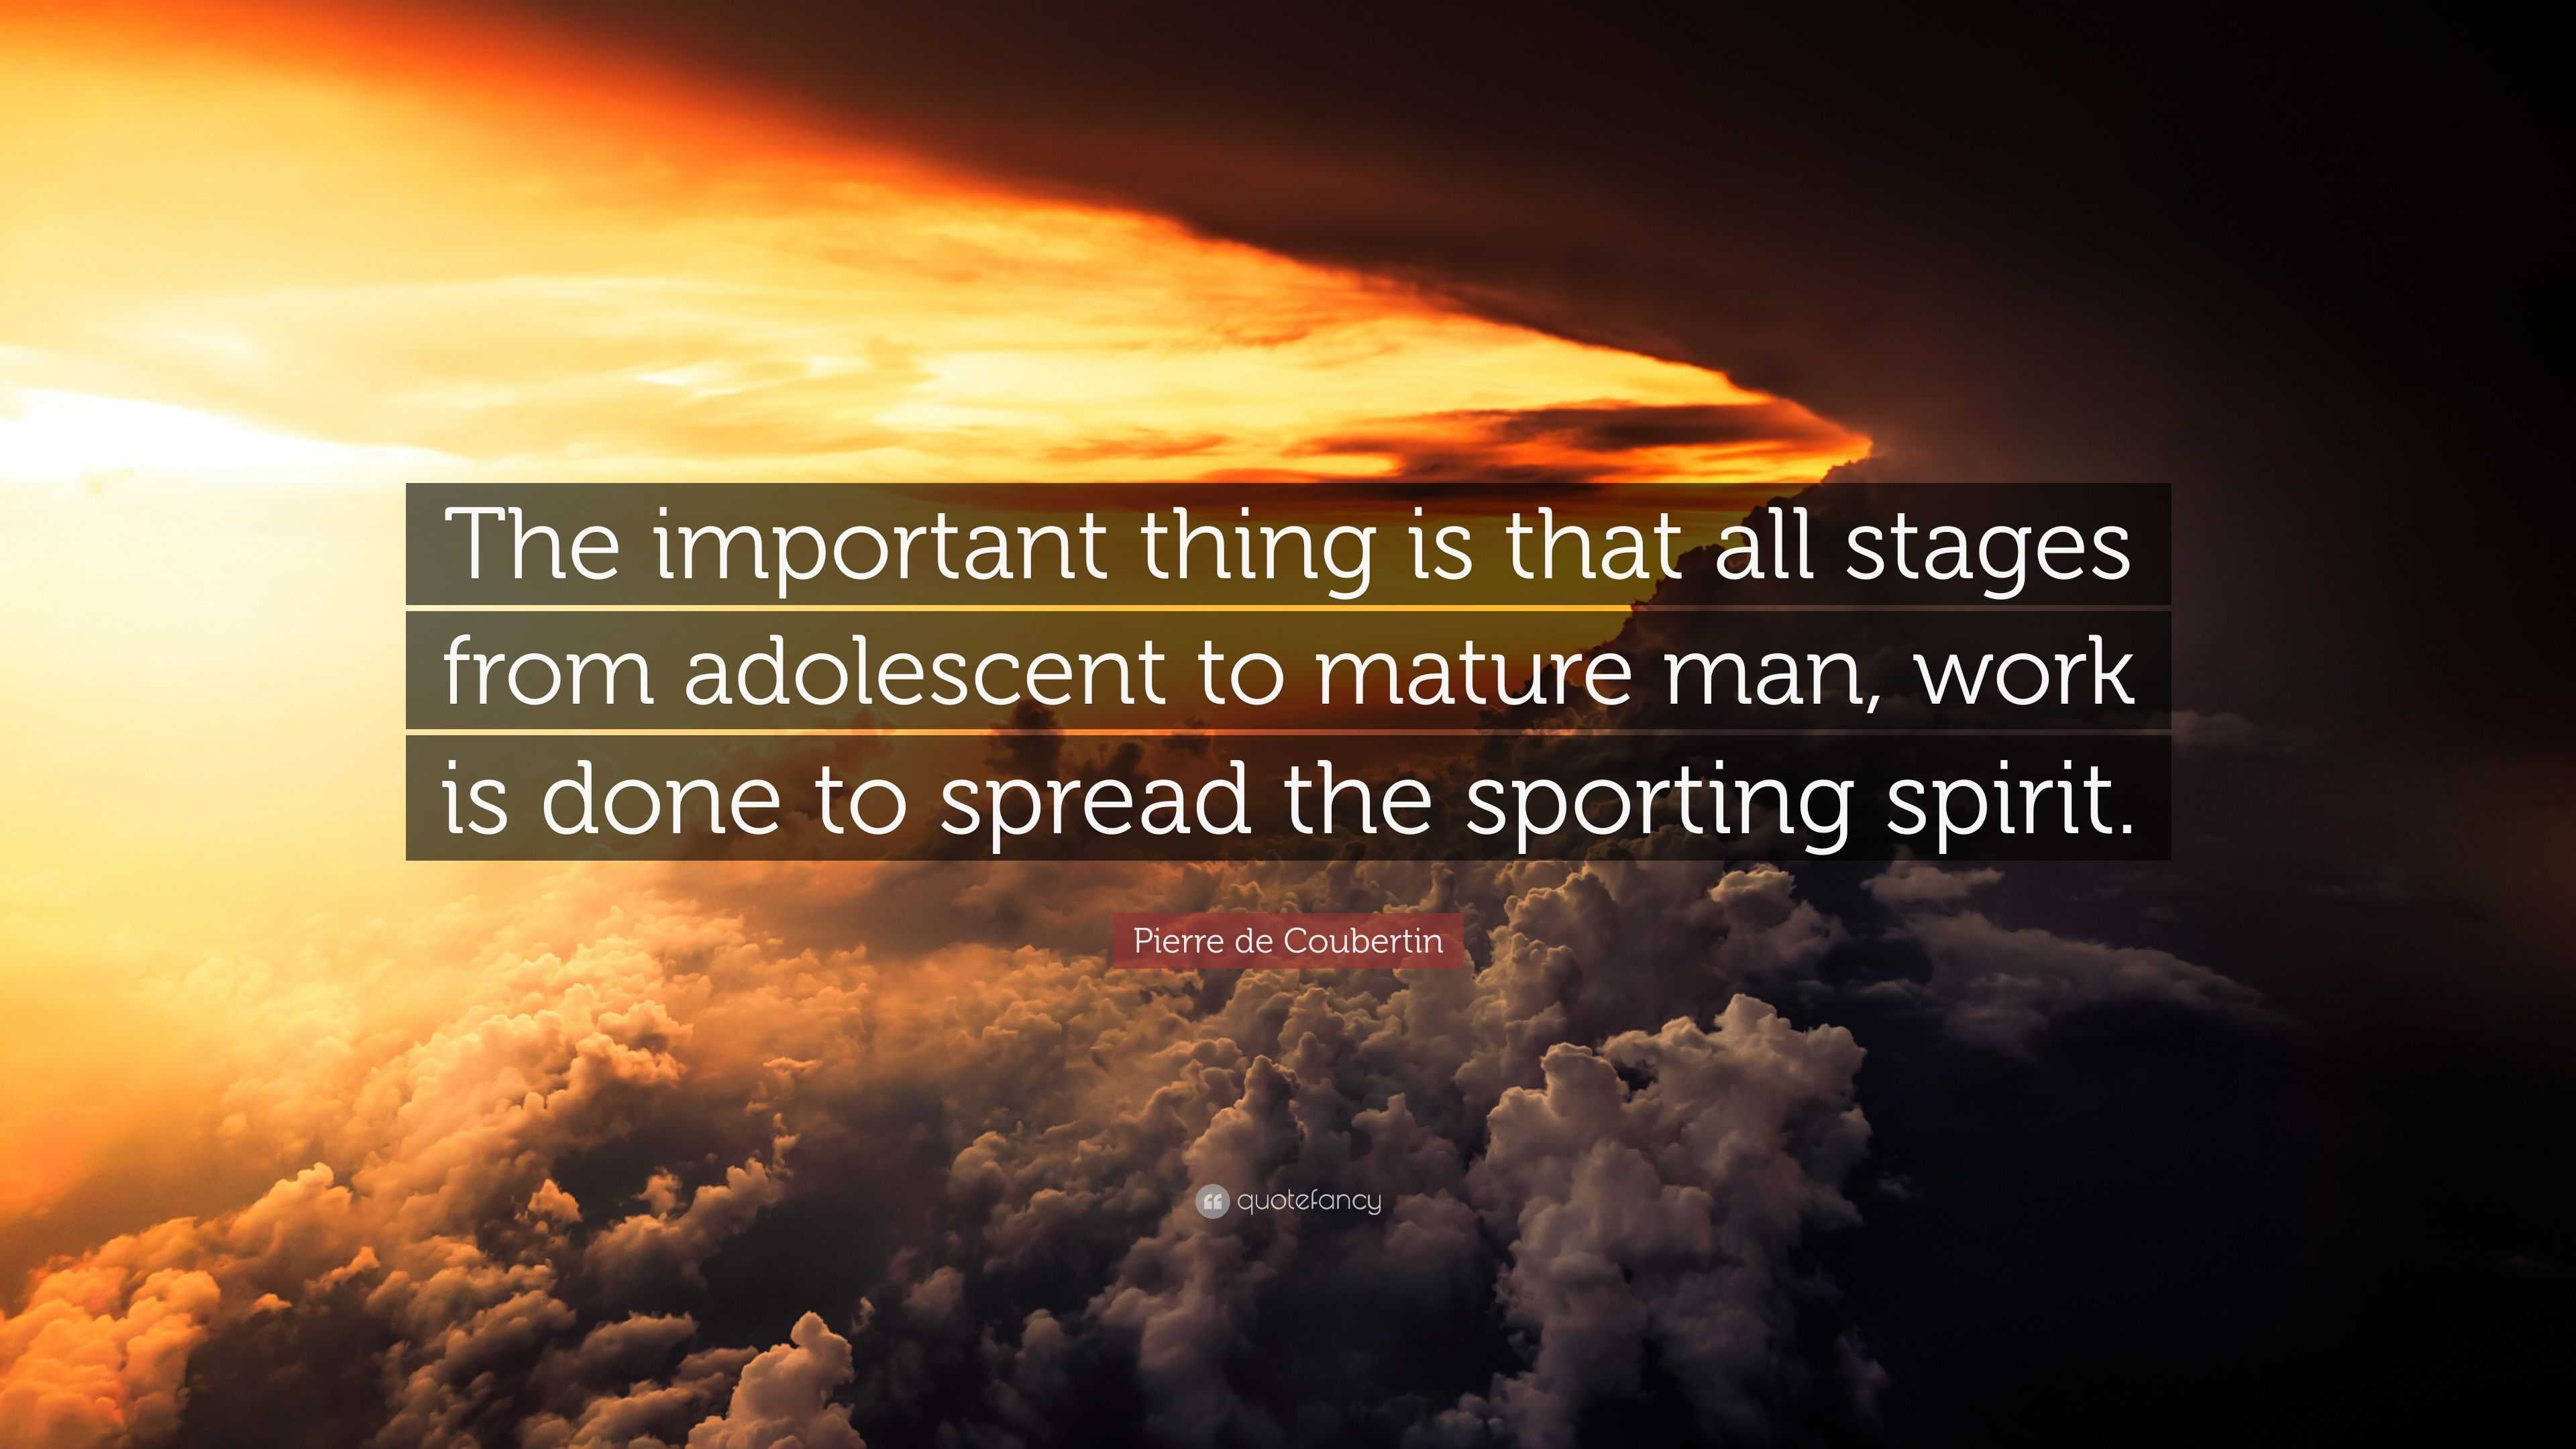 Pierre de Coubertin Quote “The important thing is that all stages from adolescent to